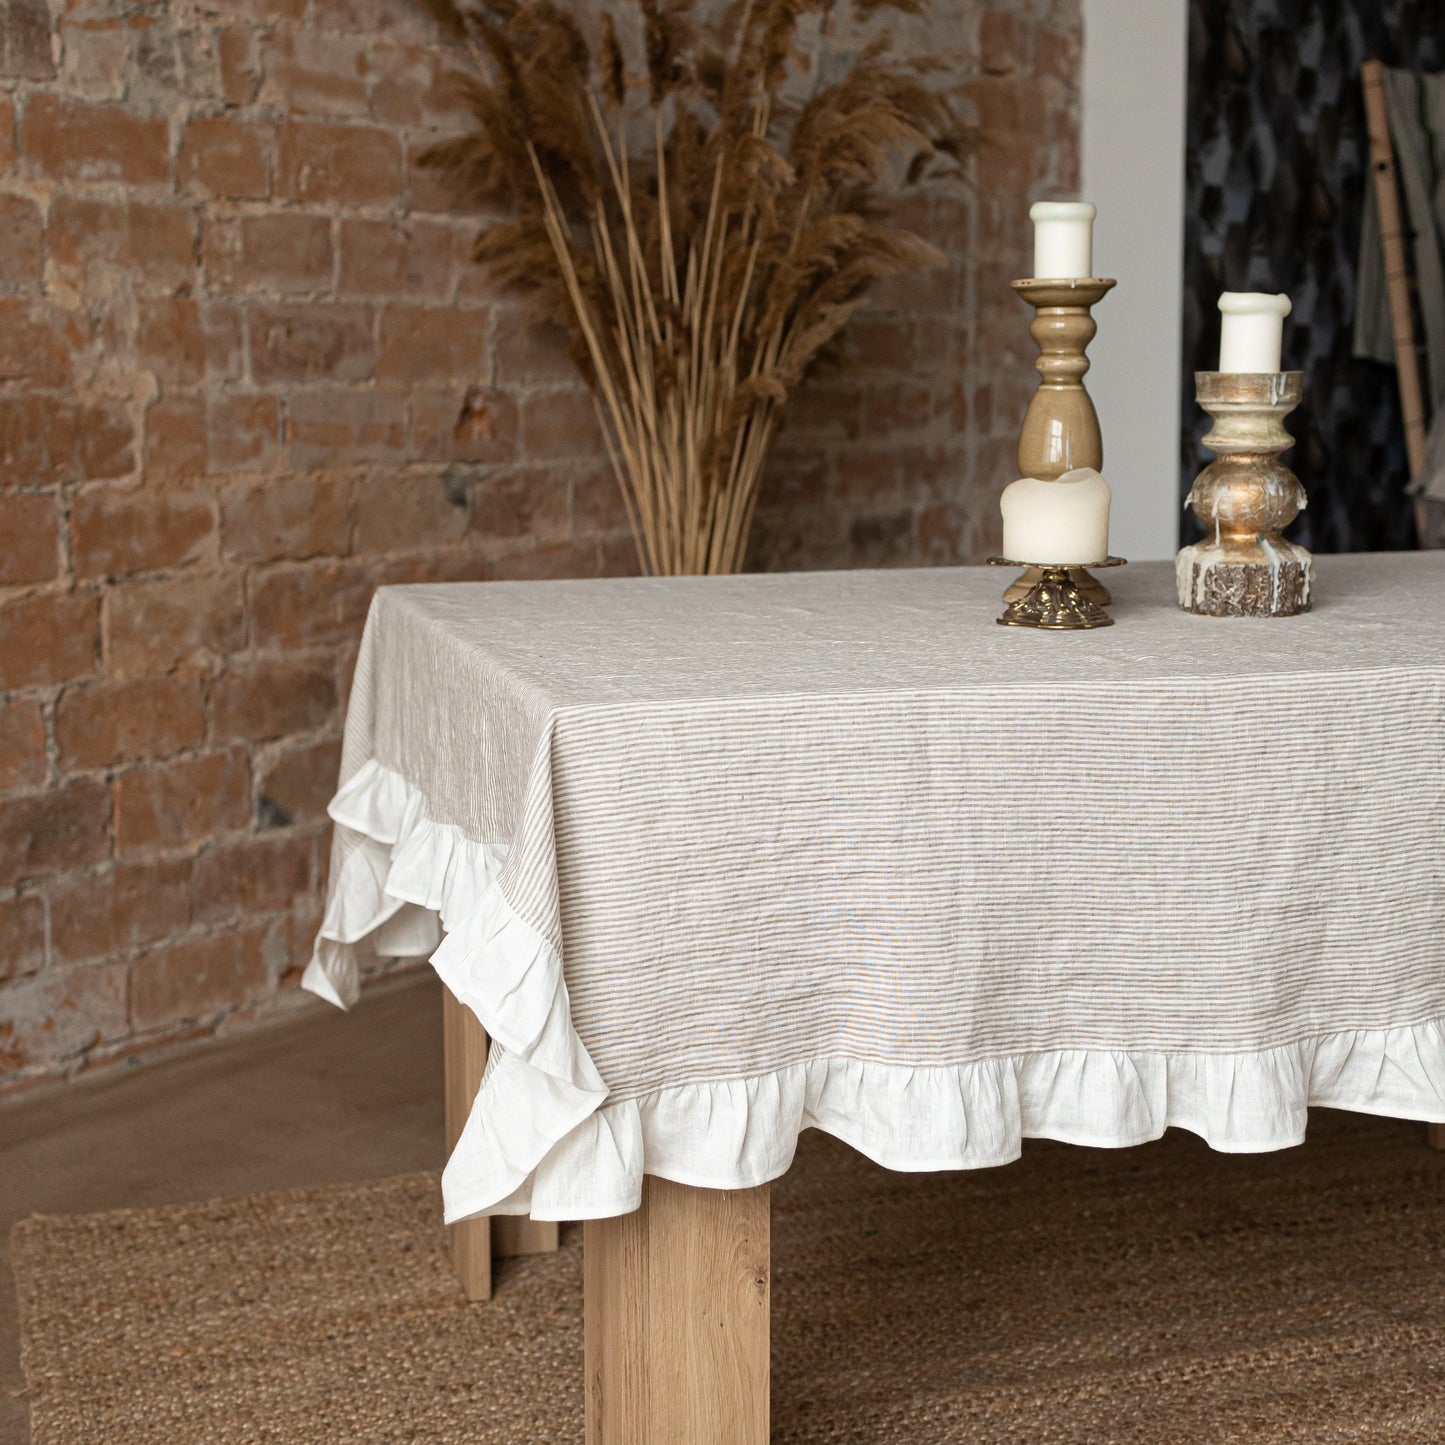 Striped linen tablecloth, pin striped tablecloth with ruffles